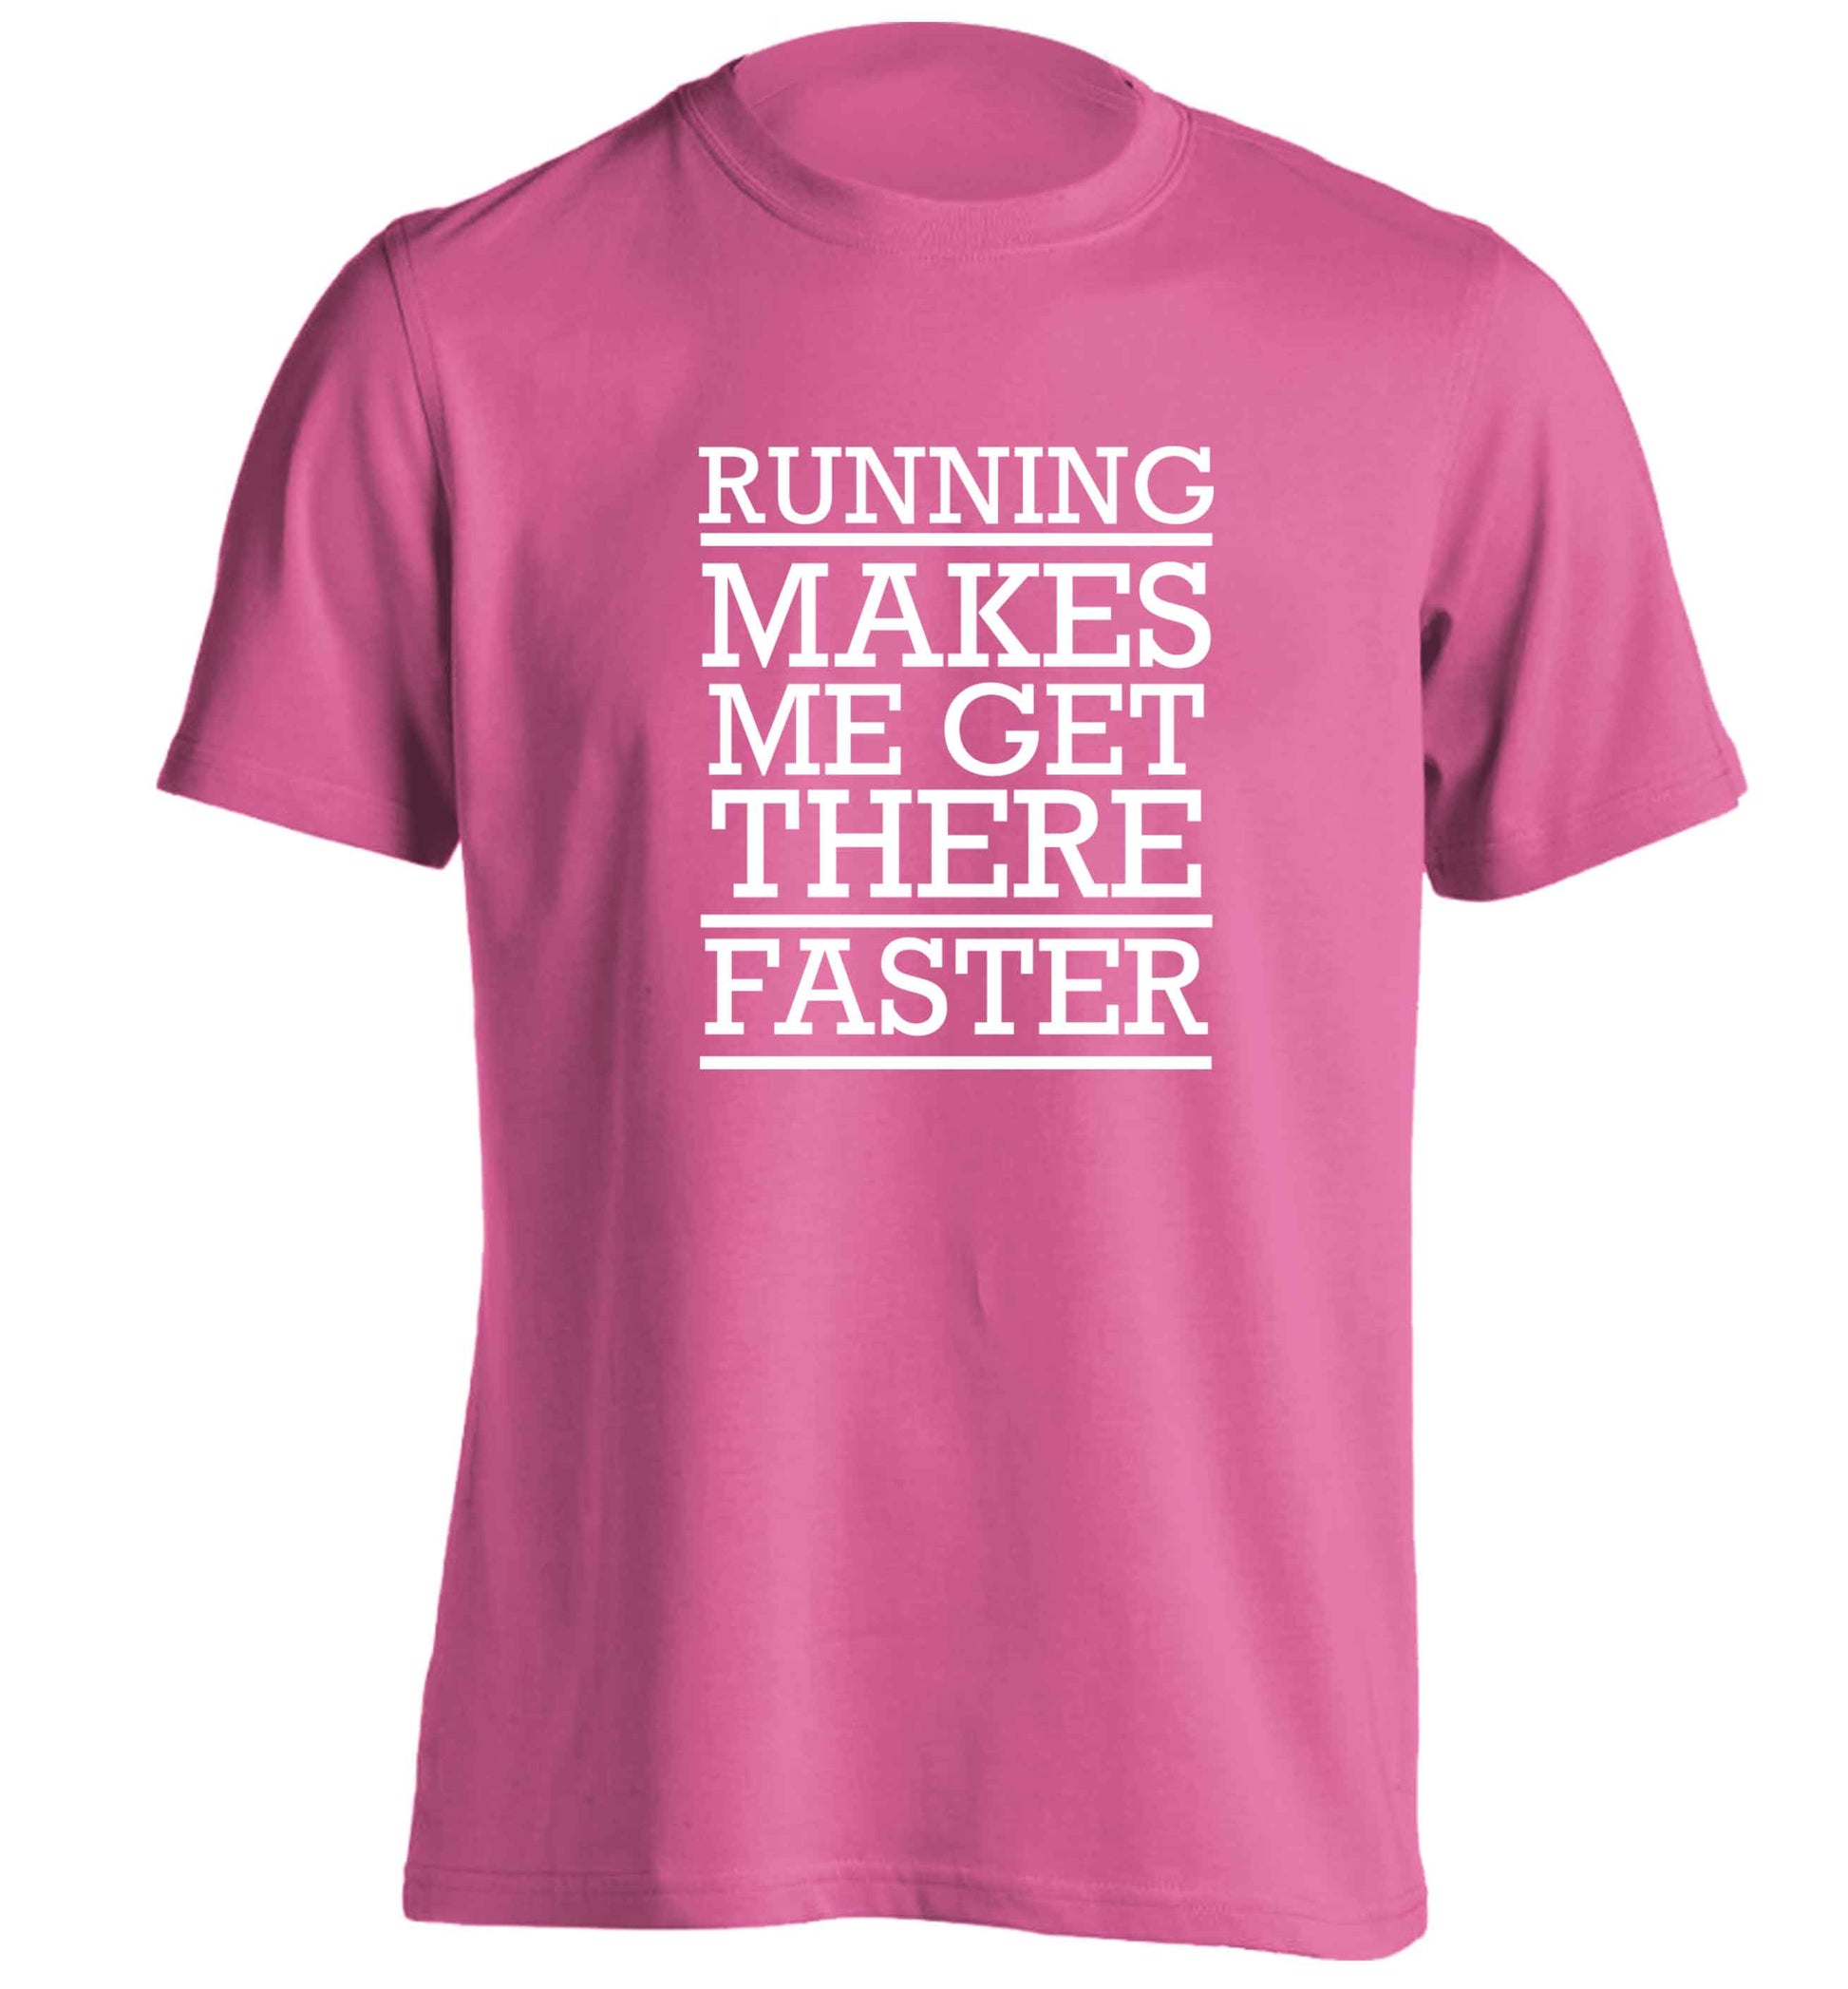 Running makes me get there faster adults unisex pink Tshirt 2XL